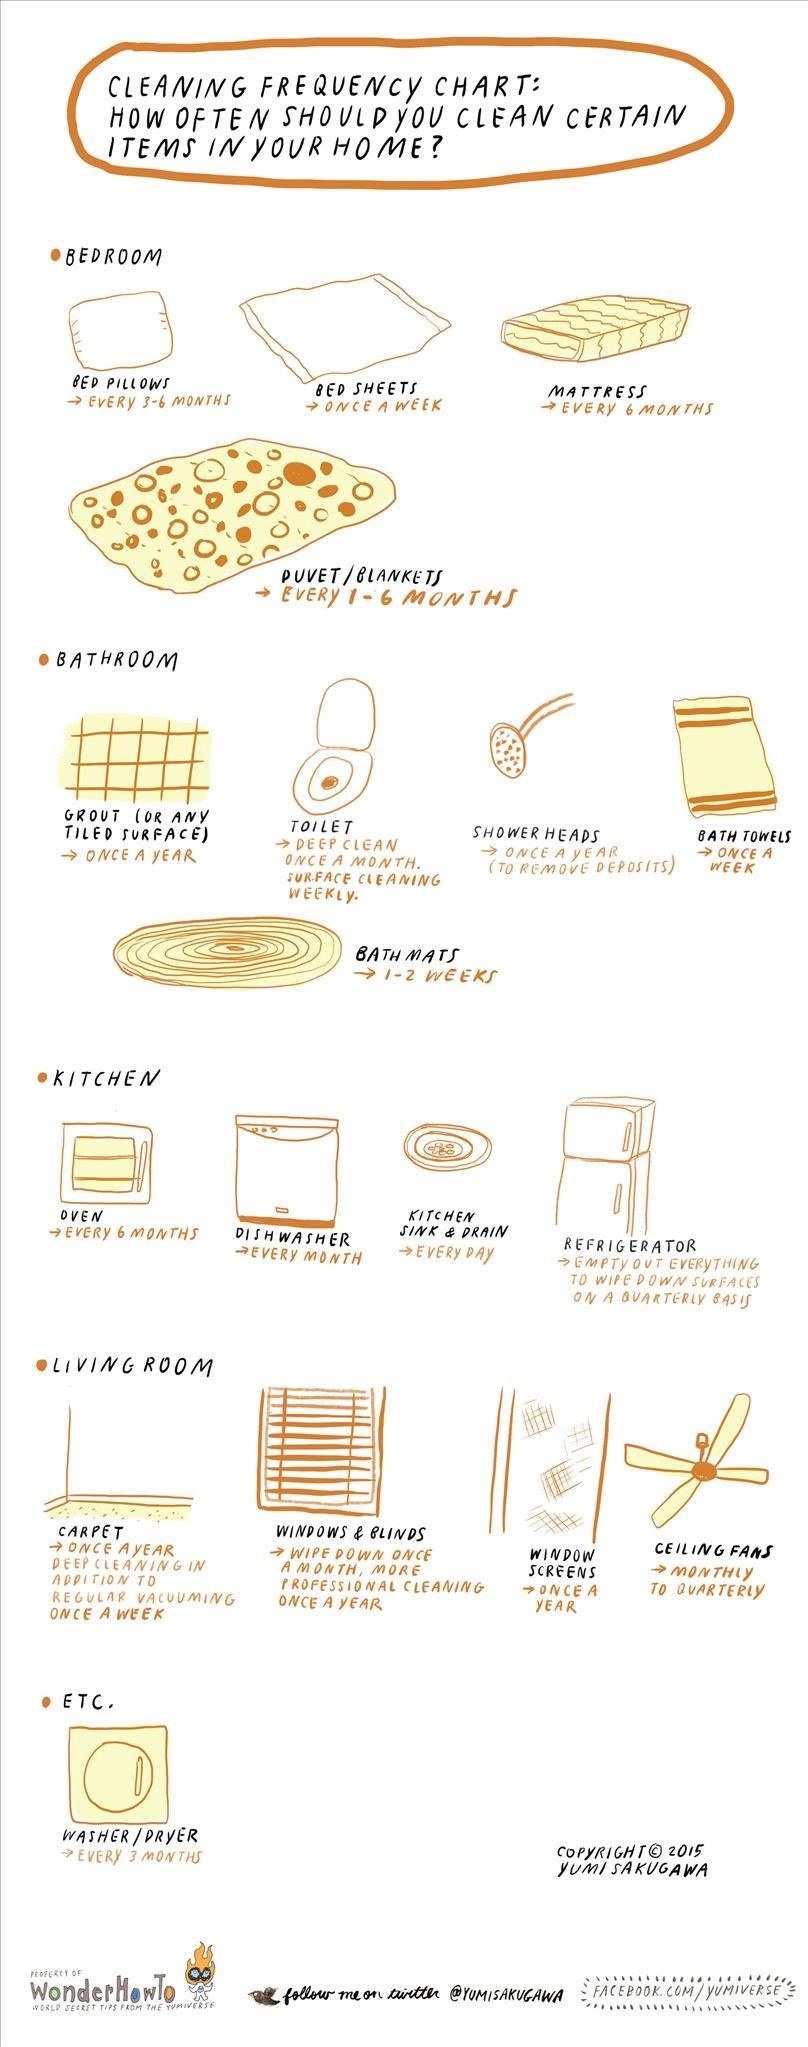 Cleaning Frequency Chart: How Often Should You Clean Certain Items in Your Home?